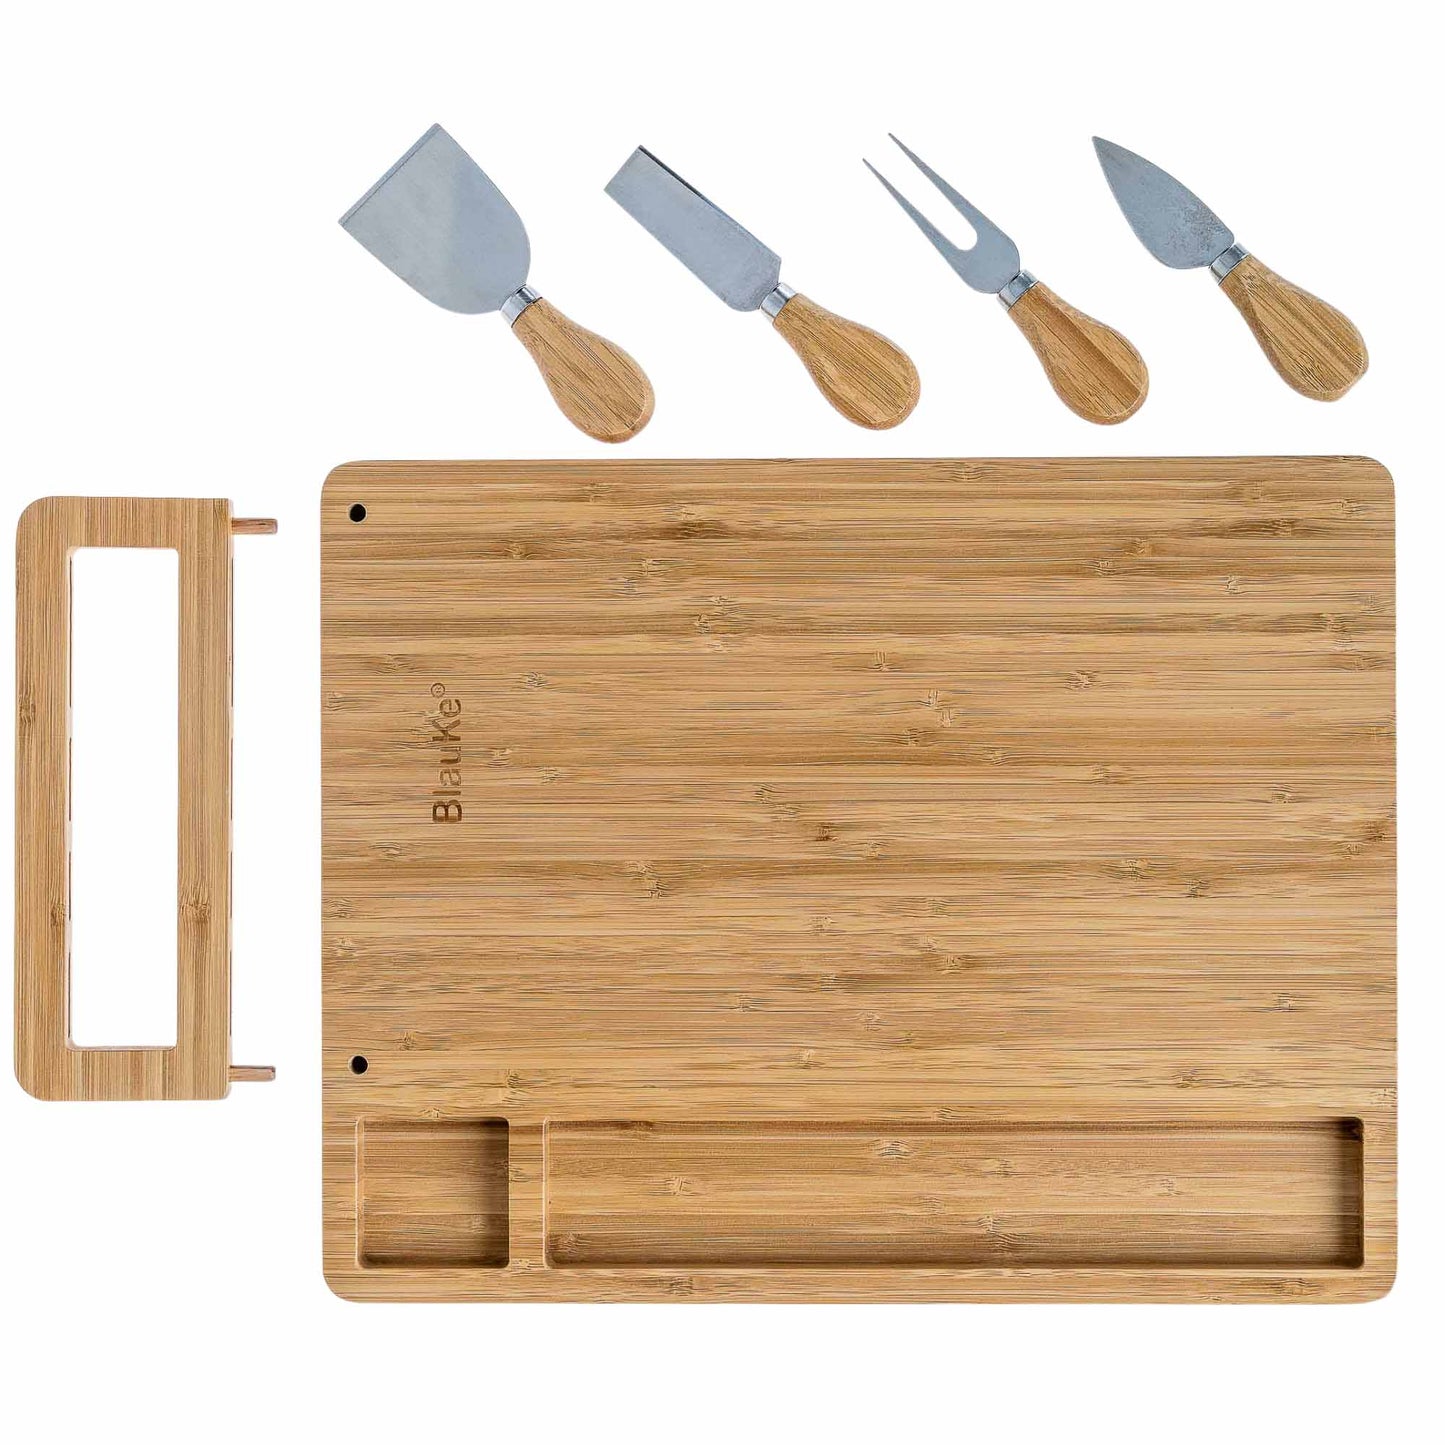 Bamboo Cheese Board and Knife Set - 14x11 inch Charcuterie Board with 4 Cheese Knives - Wood Serving Tray-13